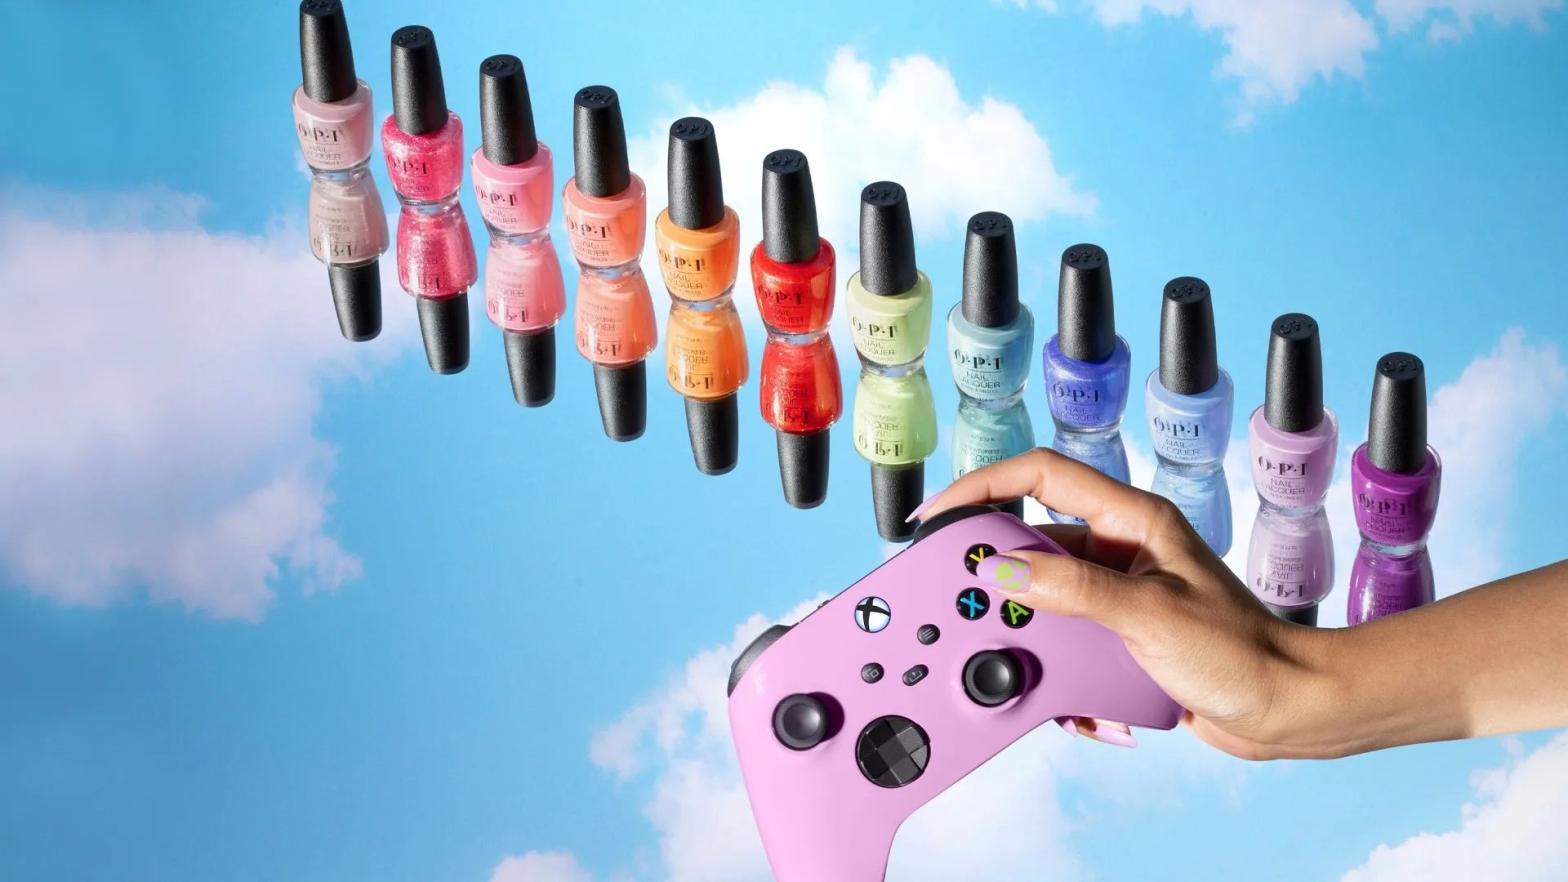 A row of brightly coloured nail polishes. A disembodied hand is holding a pink Xbox controller on a sky blue background.